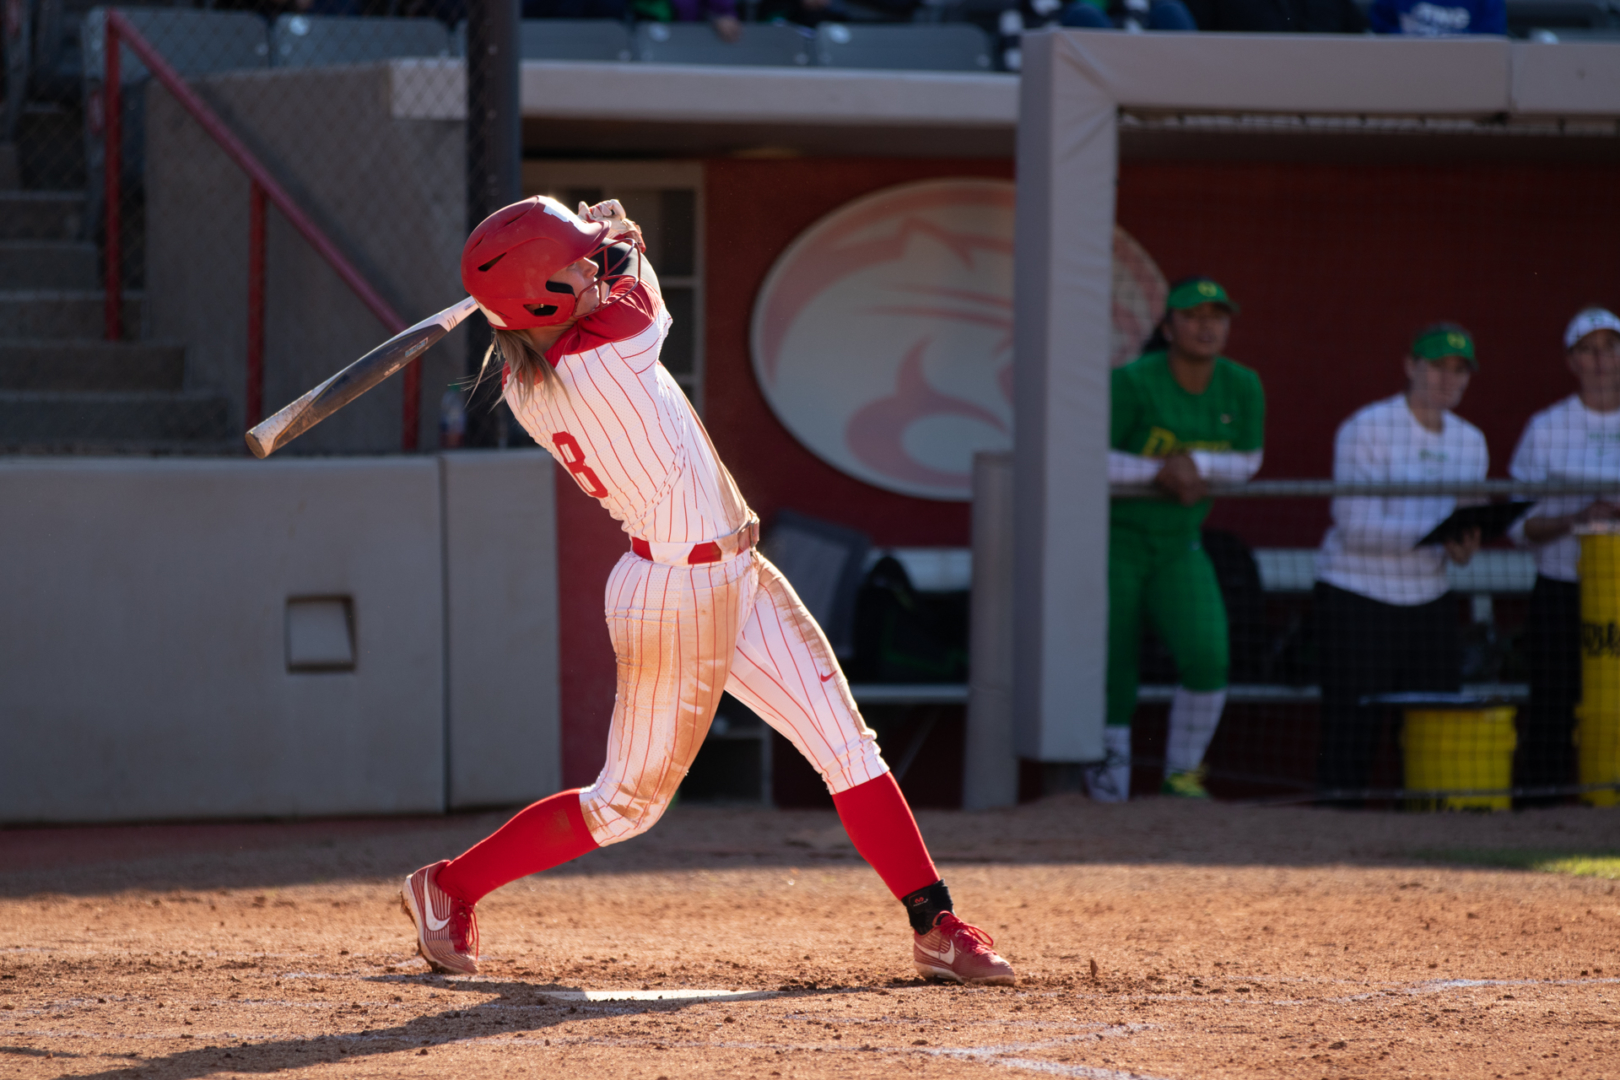 Senior infielder Sarah Queen holding her form after swinging at a pitch against Oregon on Friday afternoon. The Cougars shut down the Flyers 7-0, but they fell to the Ducks 4-2 in the second game of the day. | Kathryn Lenihan/The Cougar